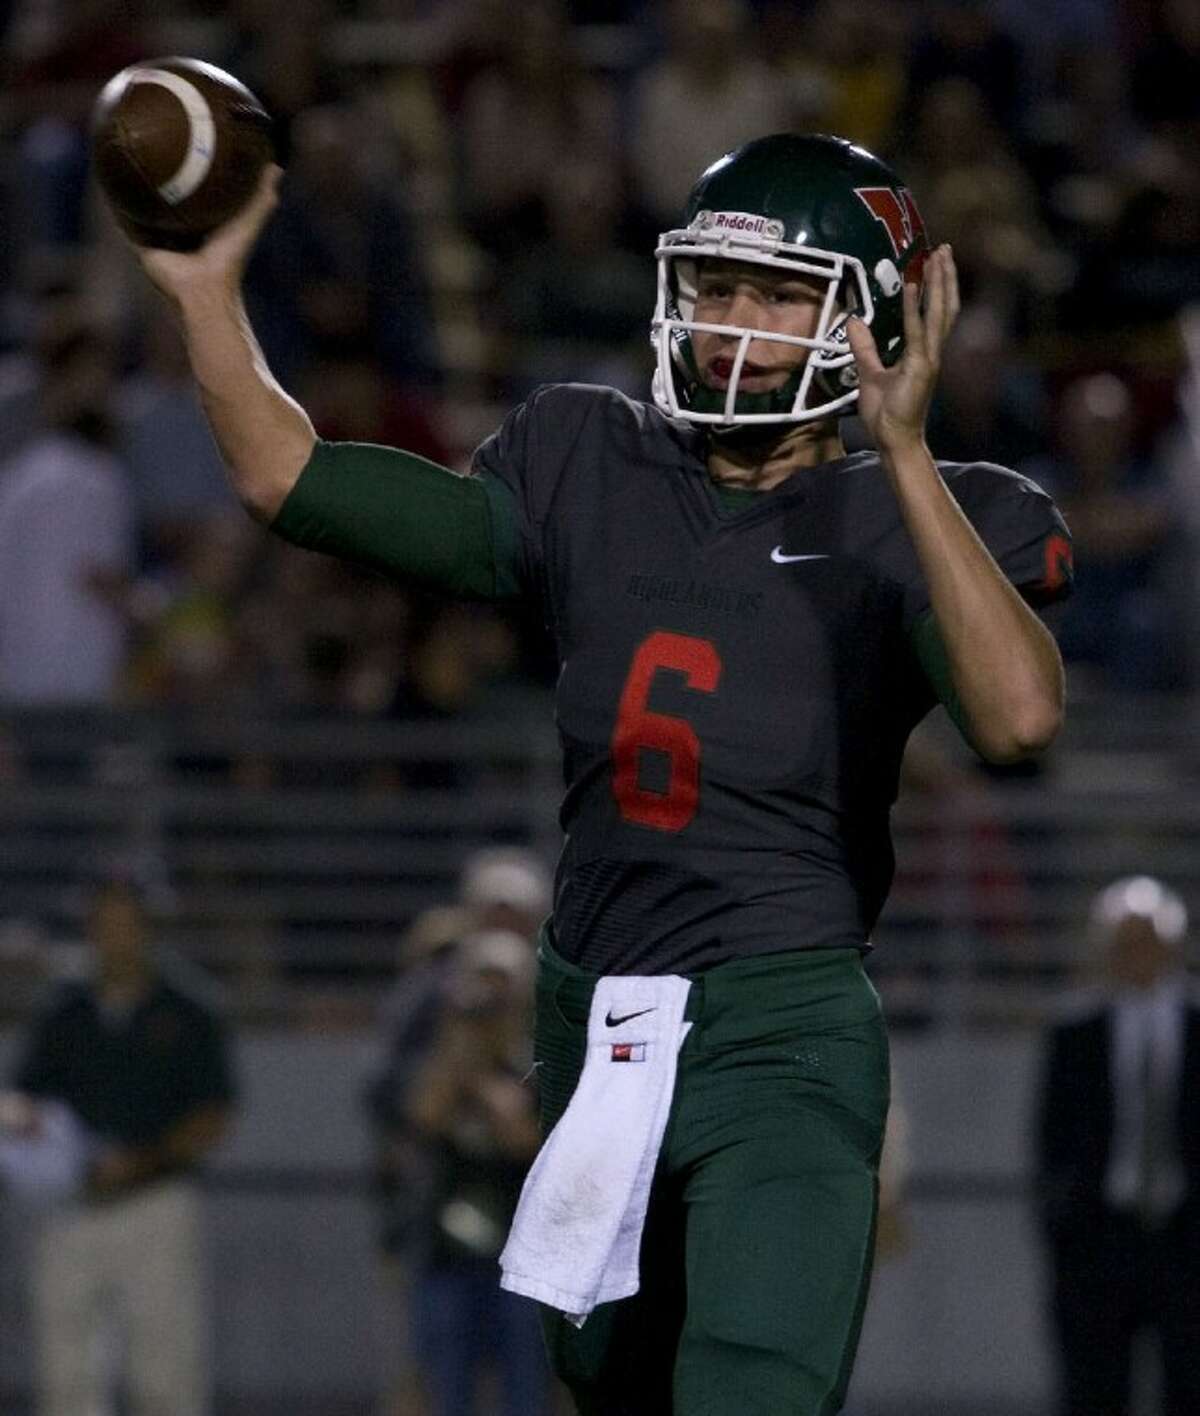 Quarterback Blaine Gillespie and The Woodlands face Round Rock Westwood in the Class 5A Division I playoffs in Waco today.